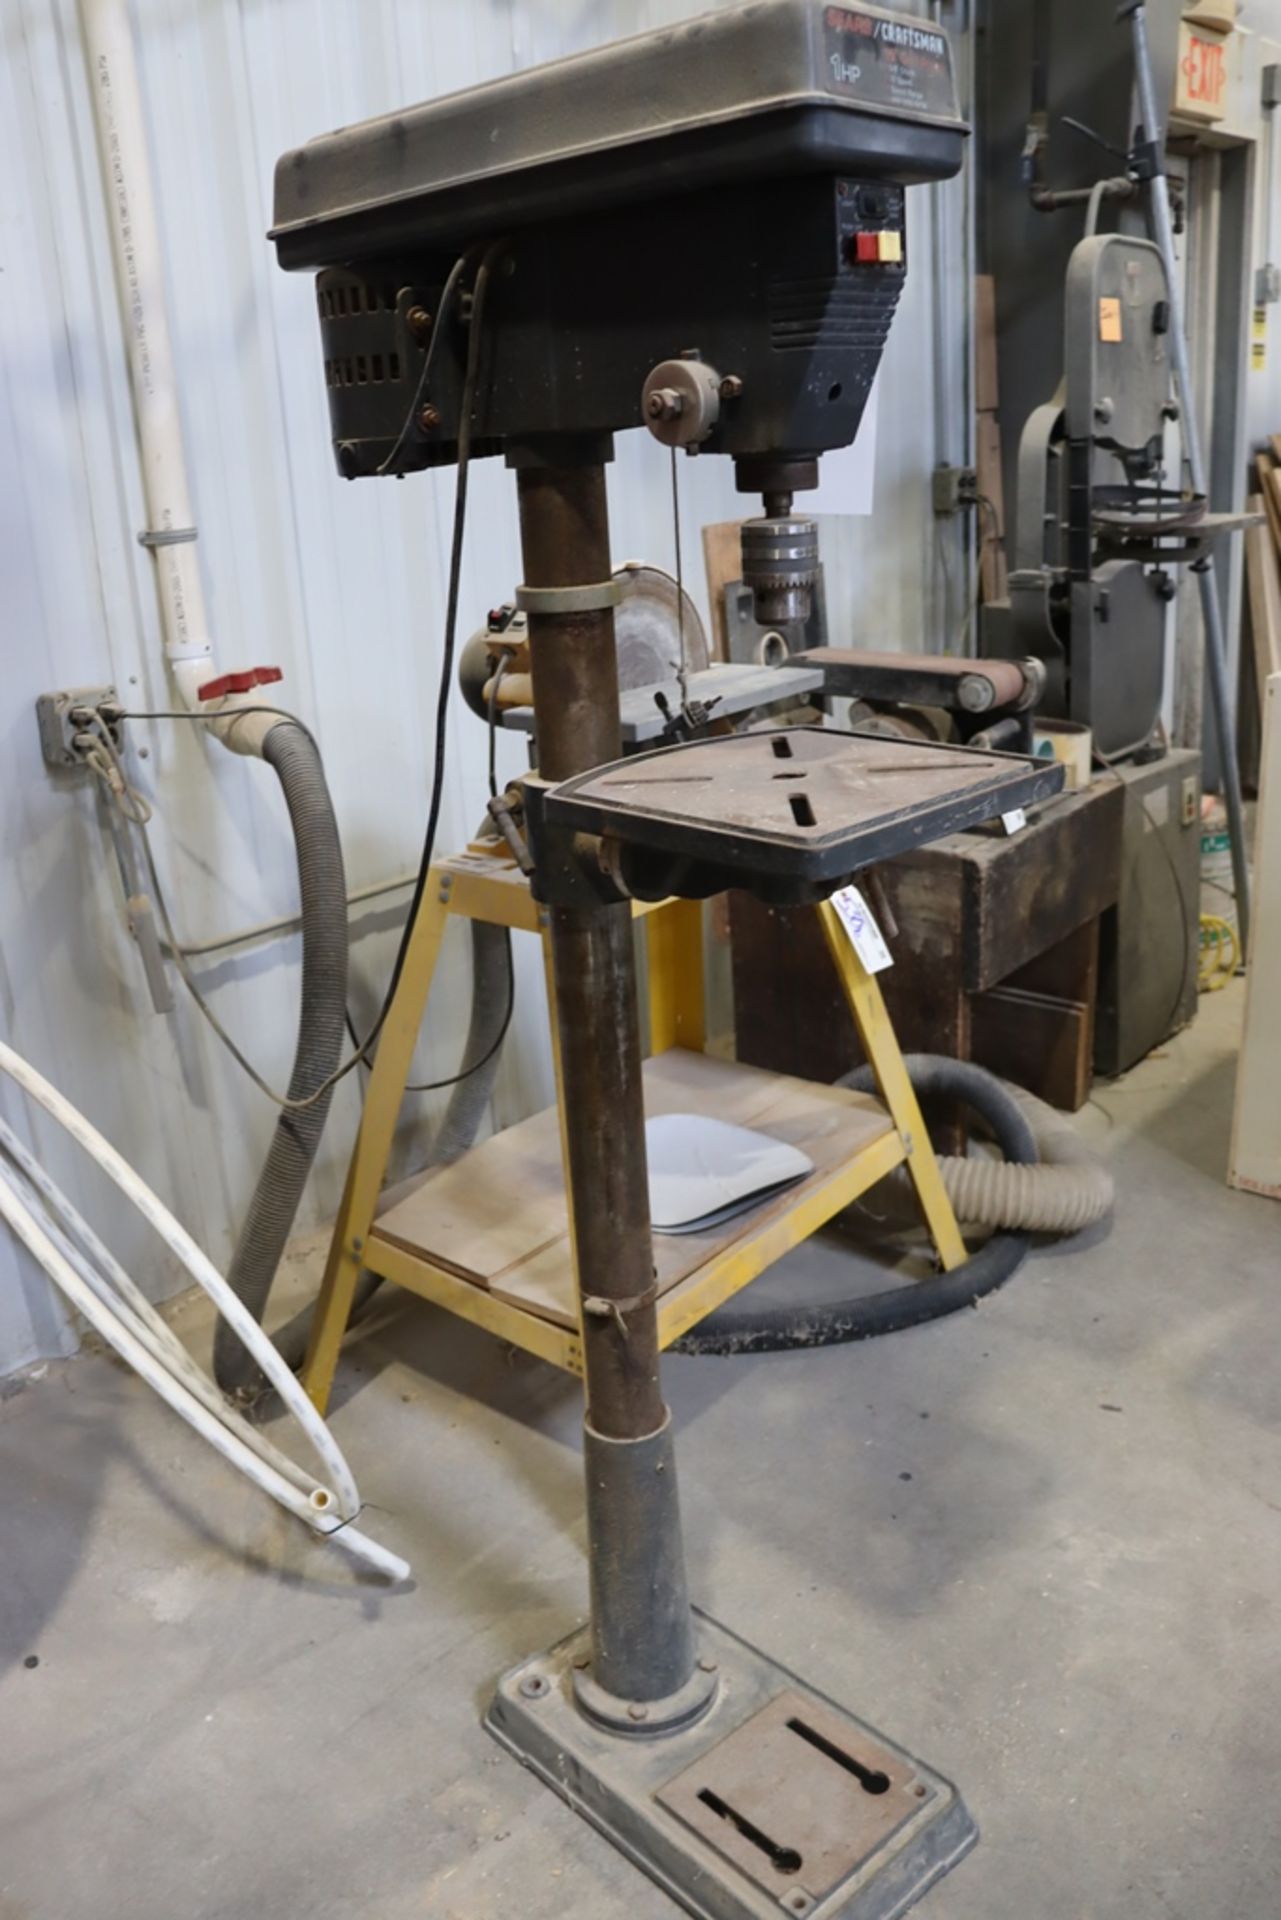 Craftsman 1HP floor mount drill press with 12" drilling table - Image 2 of 4